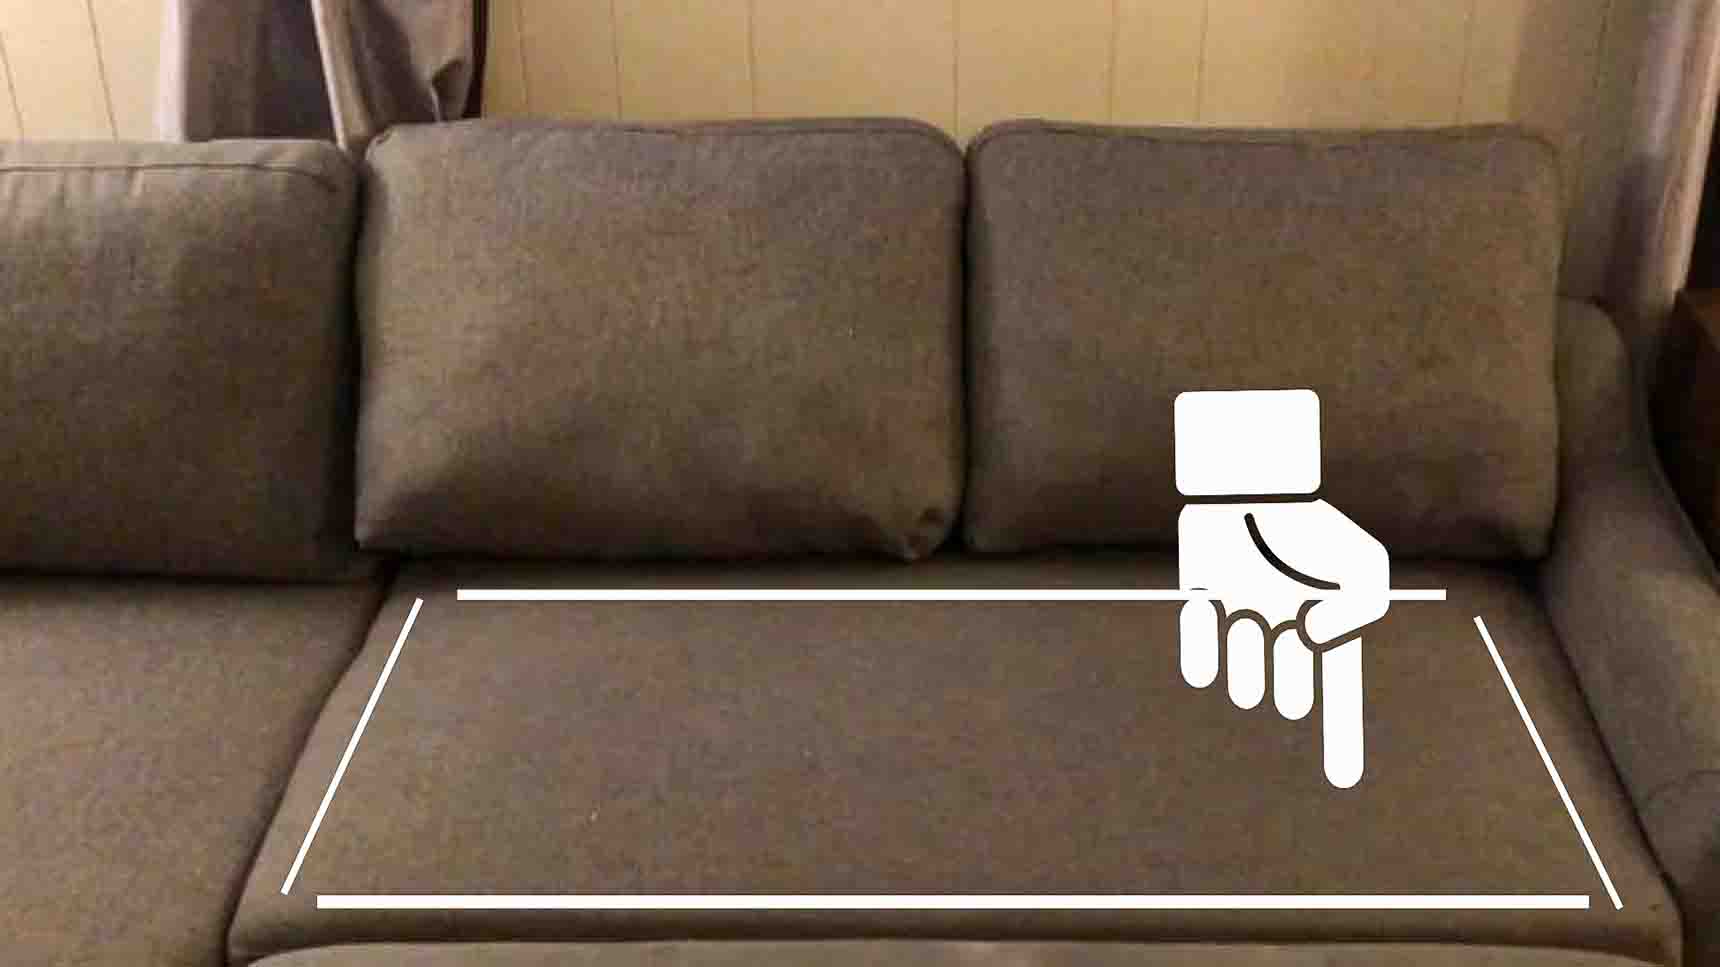 3 Proven Ways To Fix Sagging Couch Cushions at Home